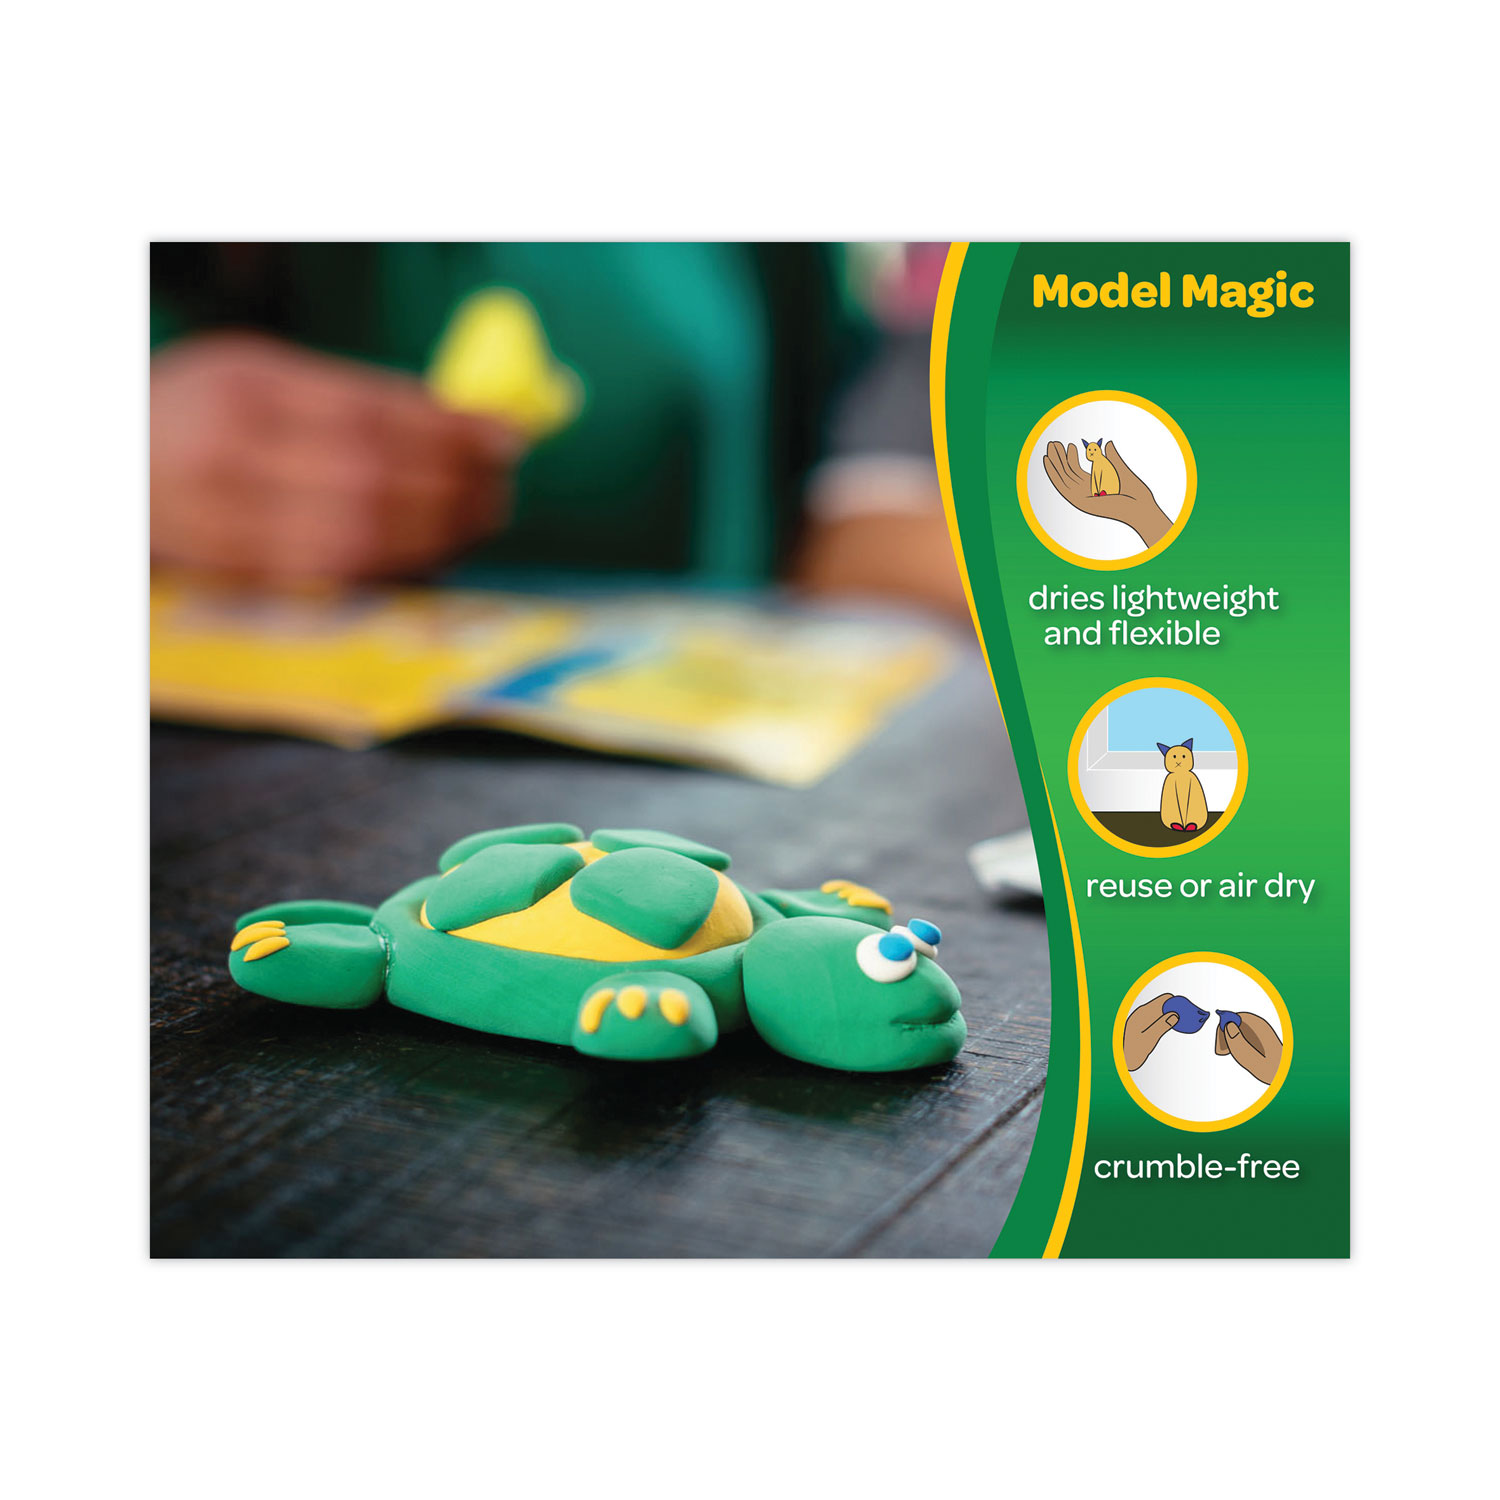 Crayola Model Magic Modeling Clay: A Tool for Creativity and Innovation